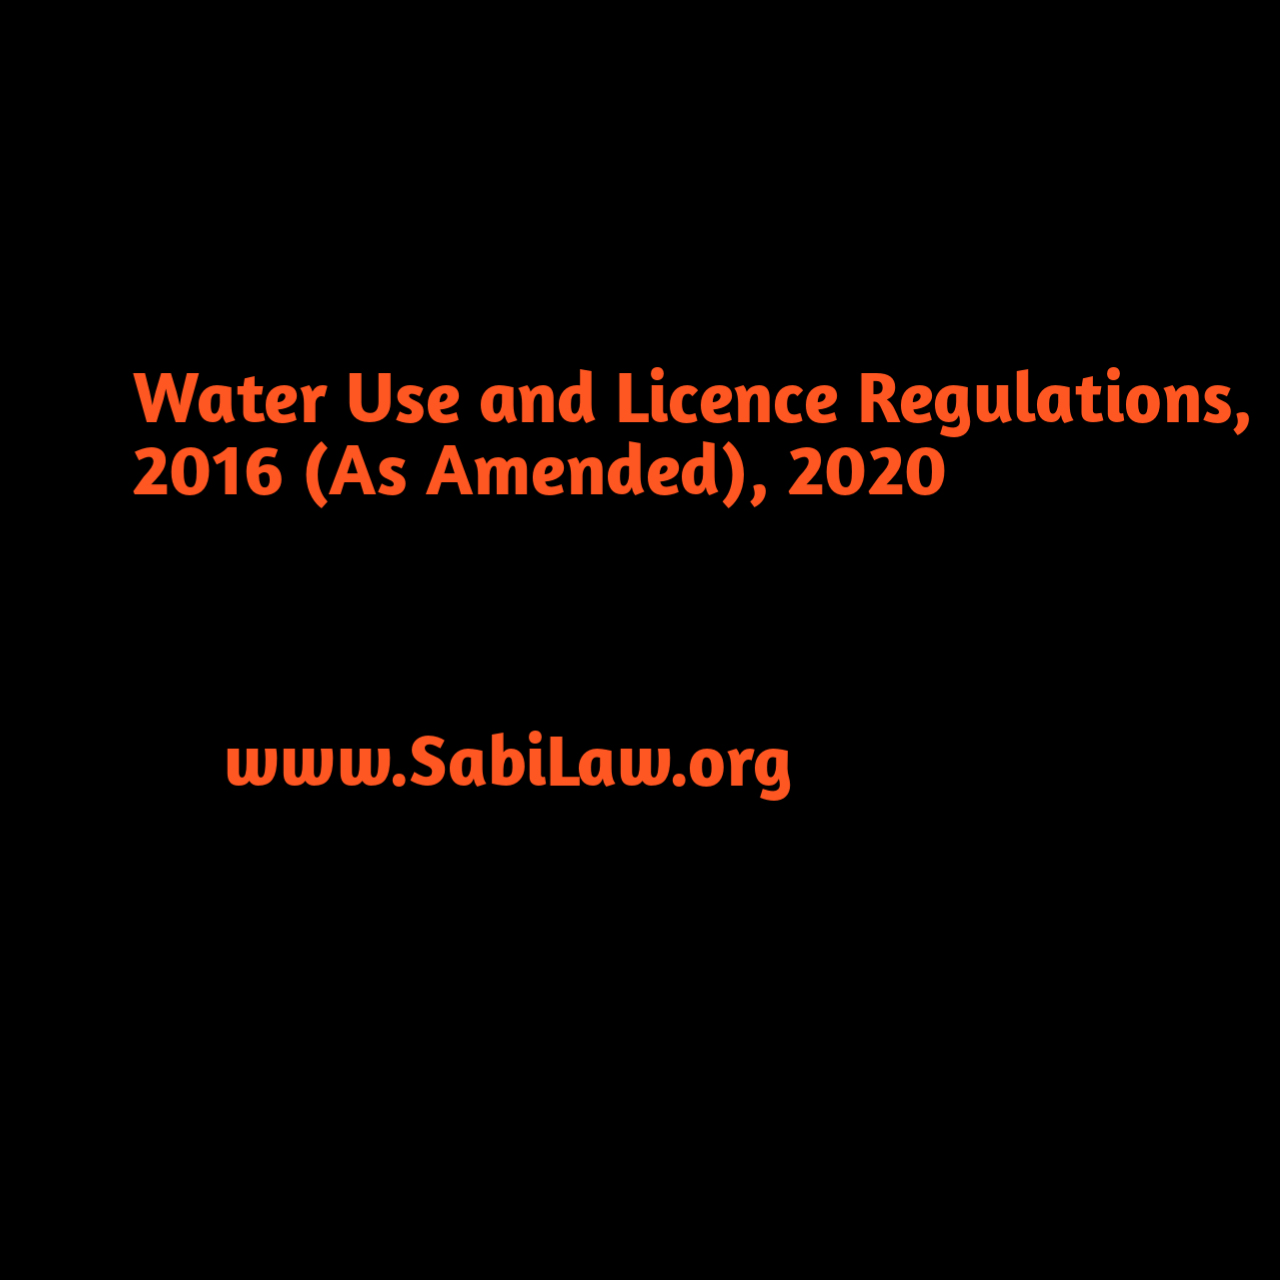 Water Use and Licence Regulations, 2016 (As Amended), 2020